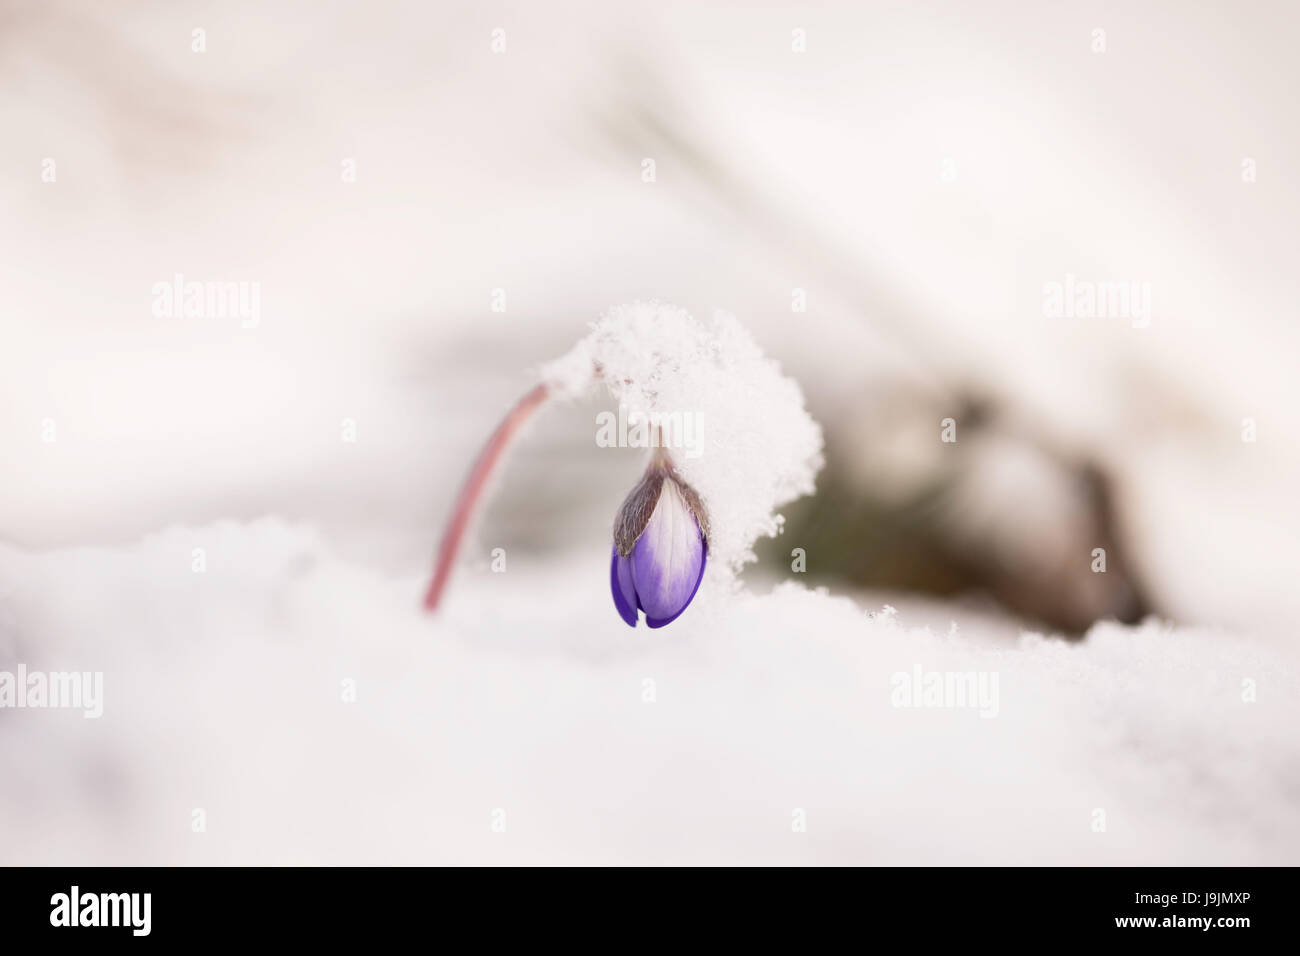 The winter came back, hepatica (Hepatica nobilis) in the snow Stock Photo